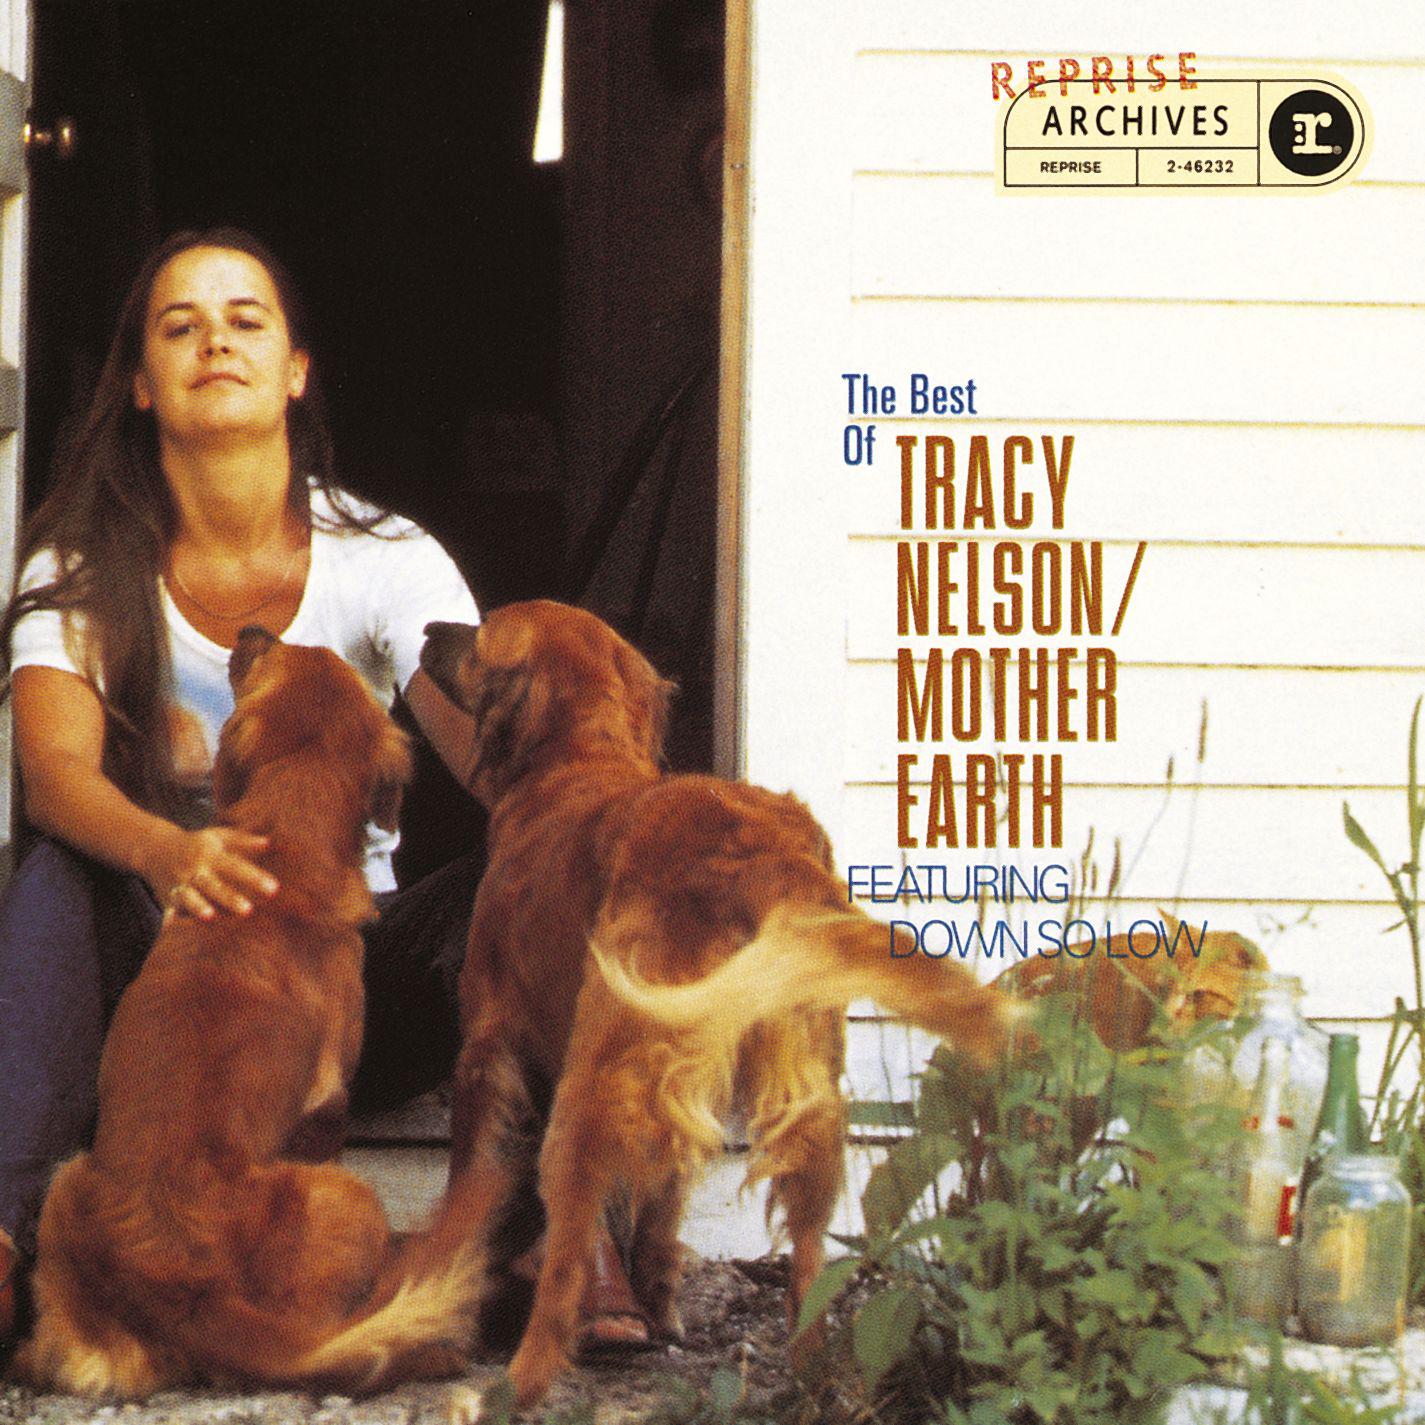 The Best Of Tracy Nelson/Mother Earth